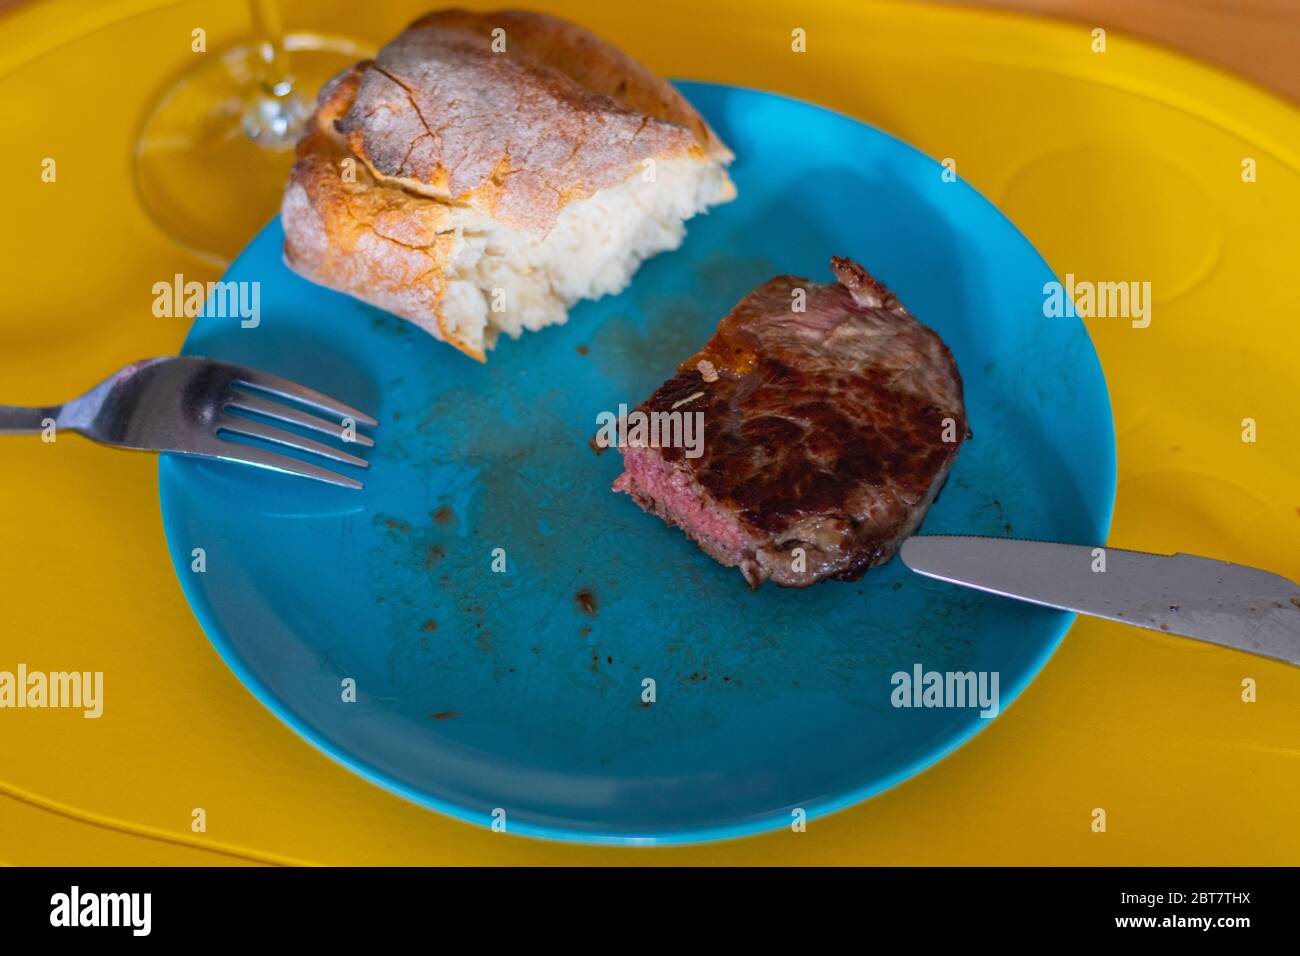 Shots of a sliced  fresh rump steak with fat on the steak on a blue plate, a glass of wine and a baguette Stock Photo